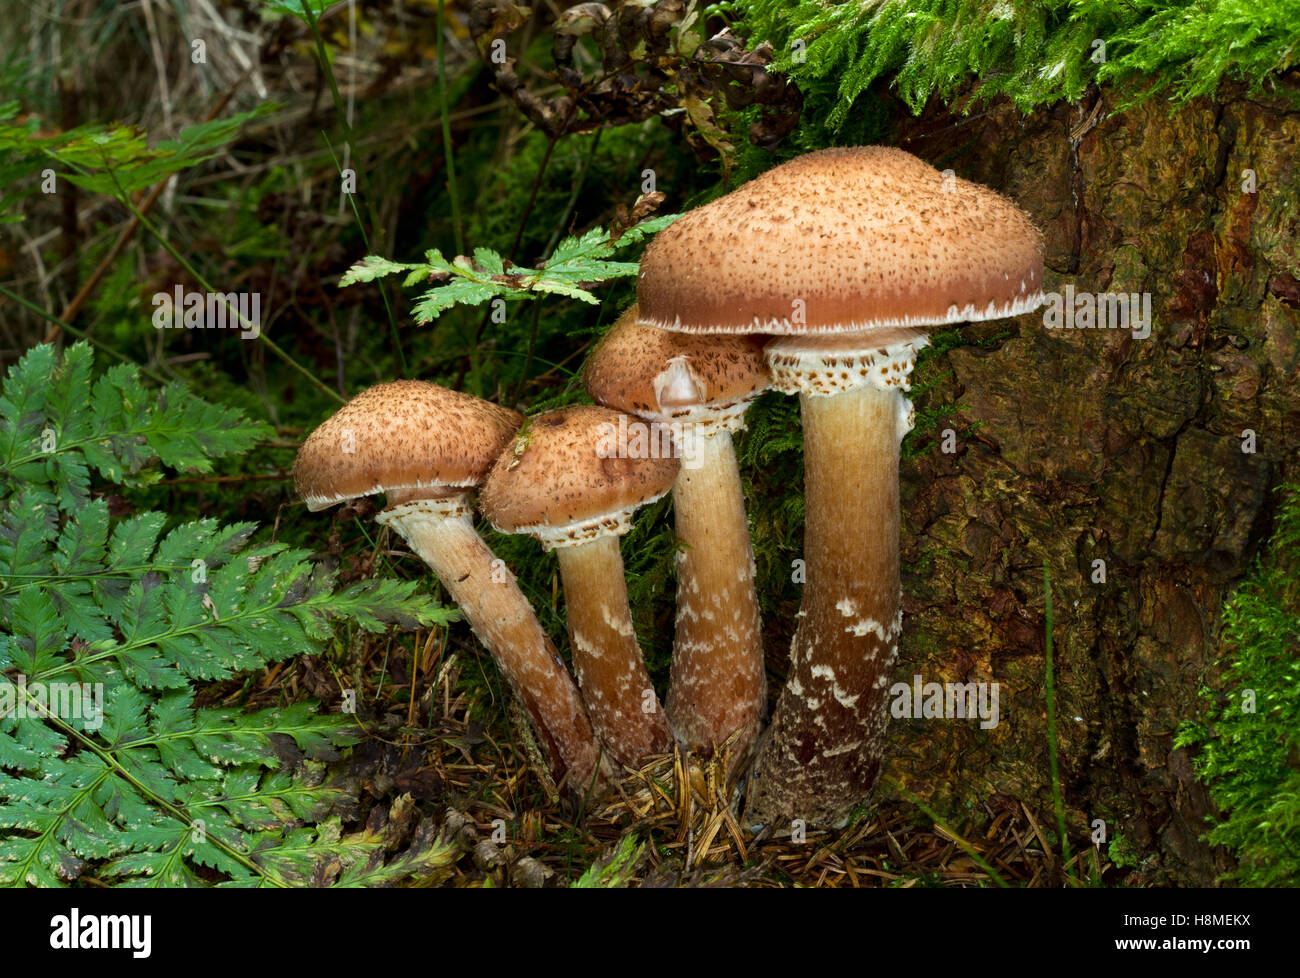 Group of Freckled Dapperling mushrooms (Lepiota aspera) and a fern at the foot of a tree Stock Photo